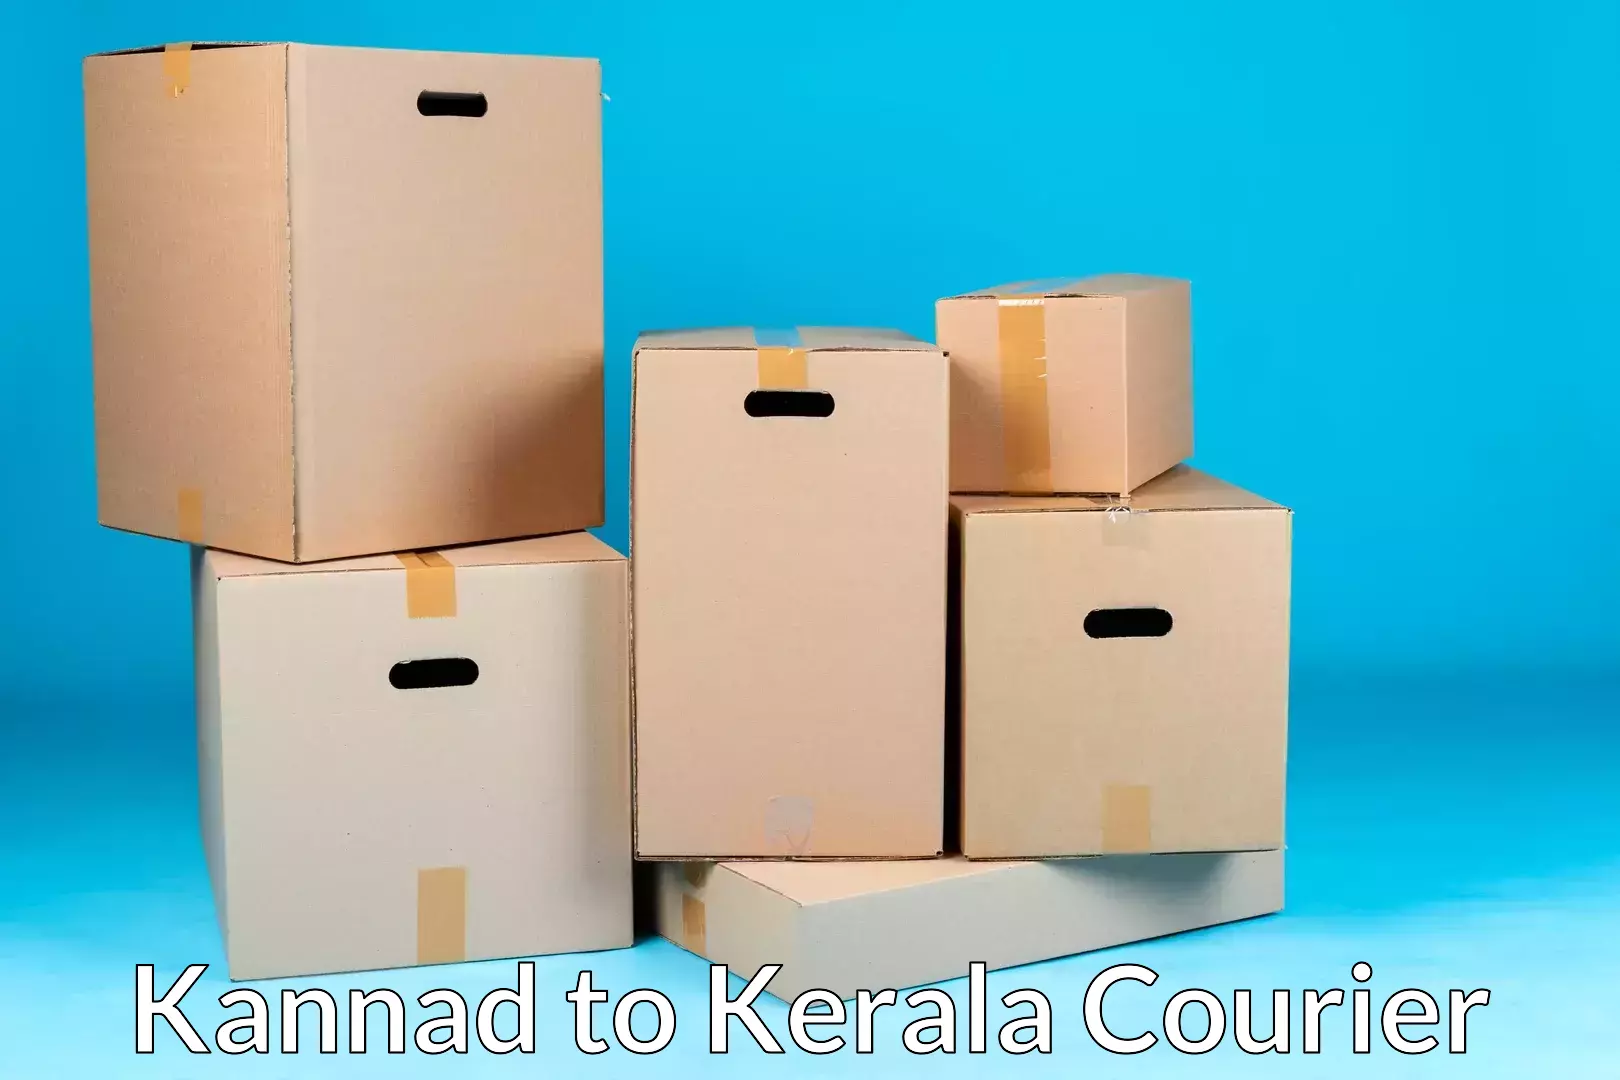 Hassle-free relocation Kannad to Perambra